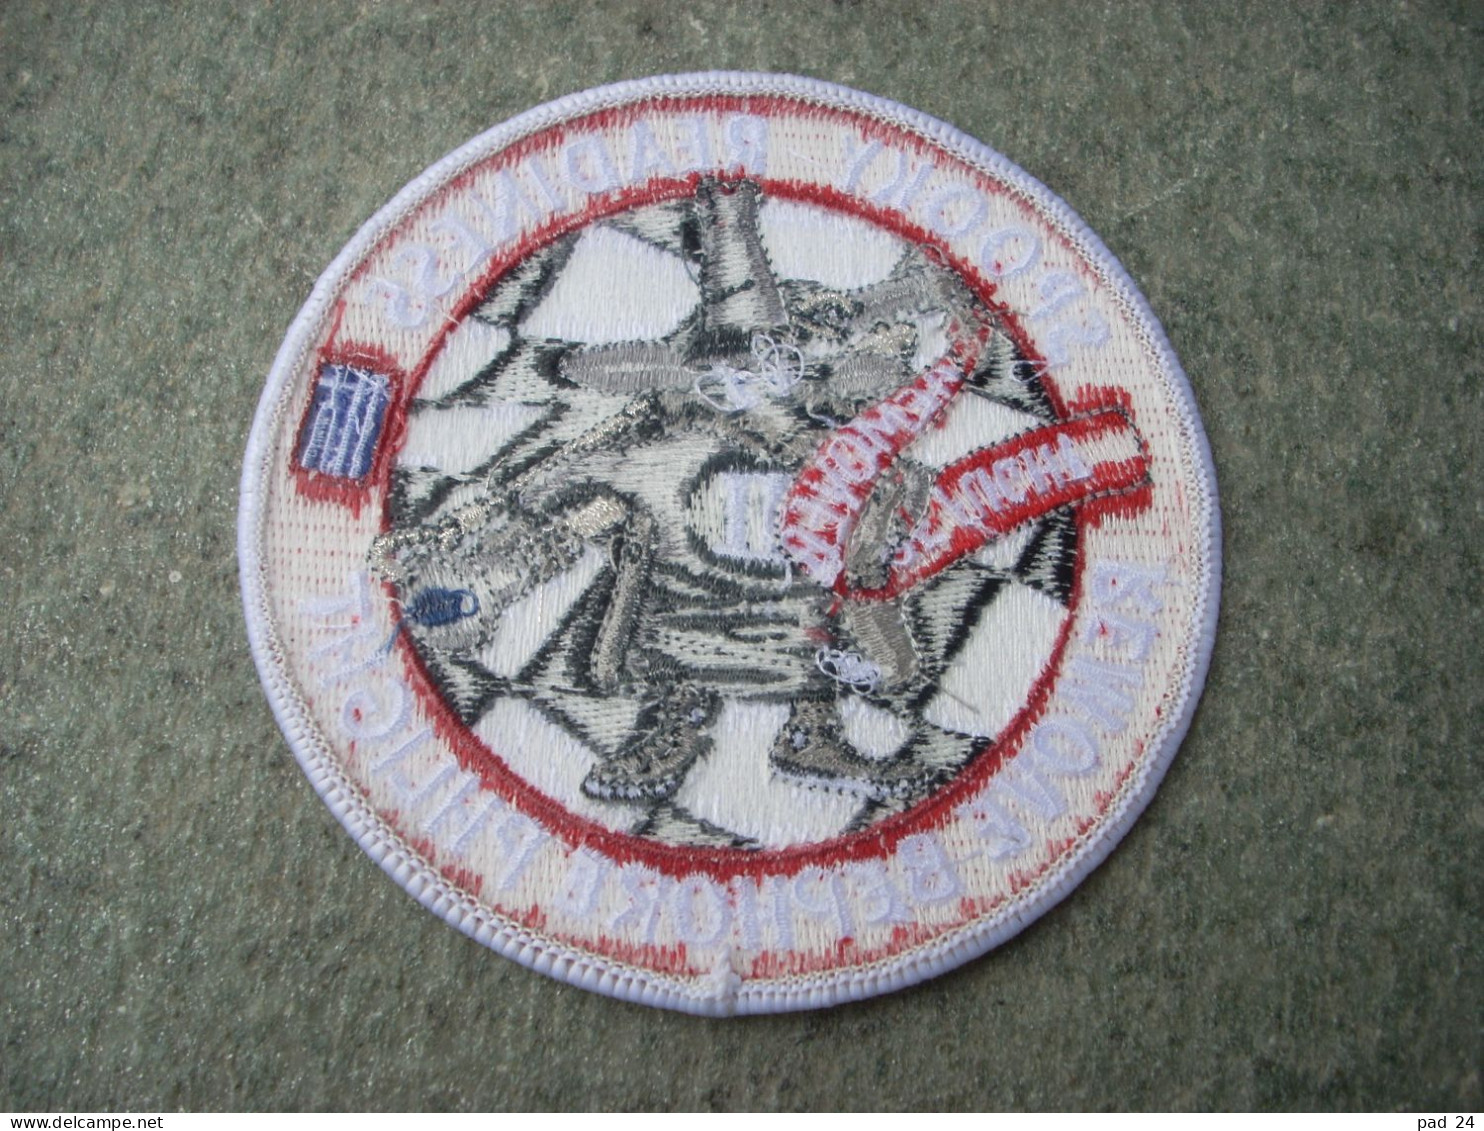 Official Patch HELLENIC AIR FORCE SPOOKY READINESS REMOVE BEPHORE PHLIGHT - Aviazione